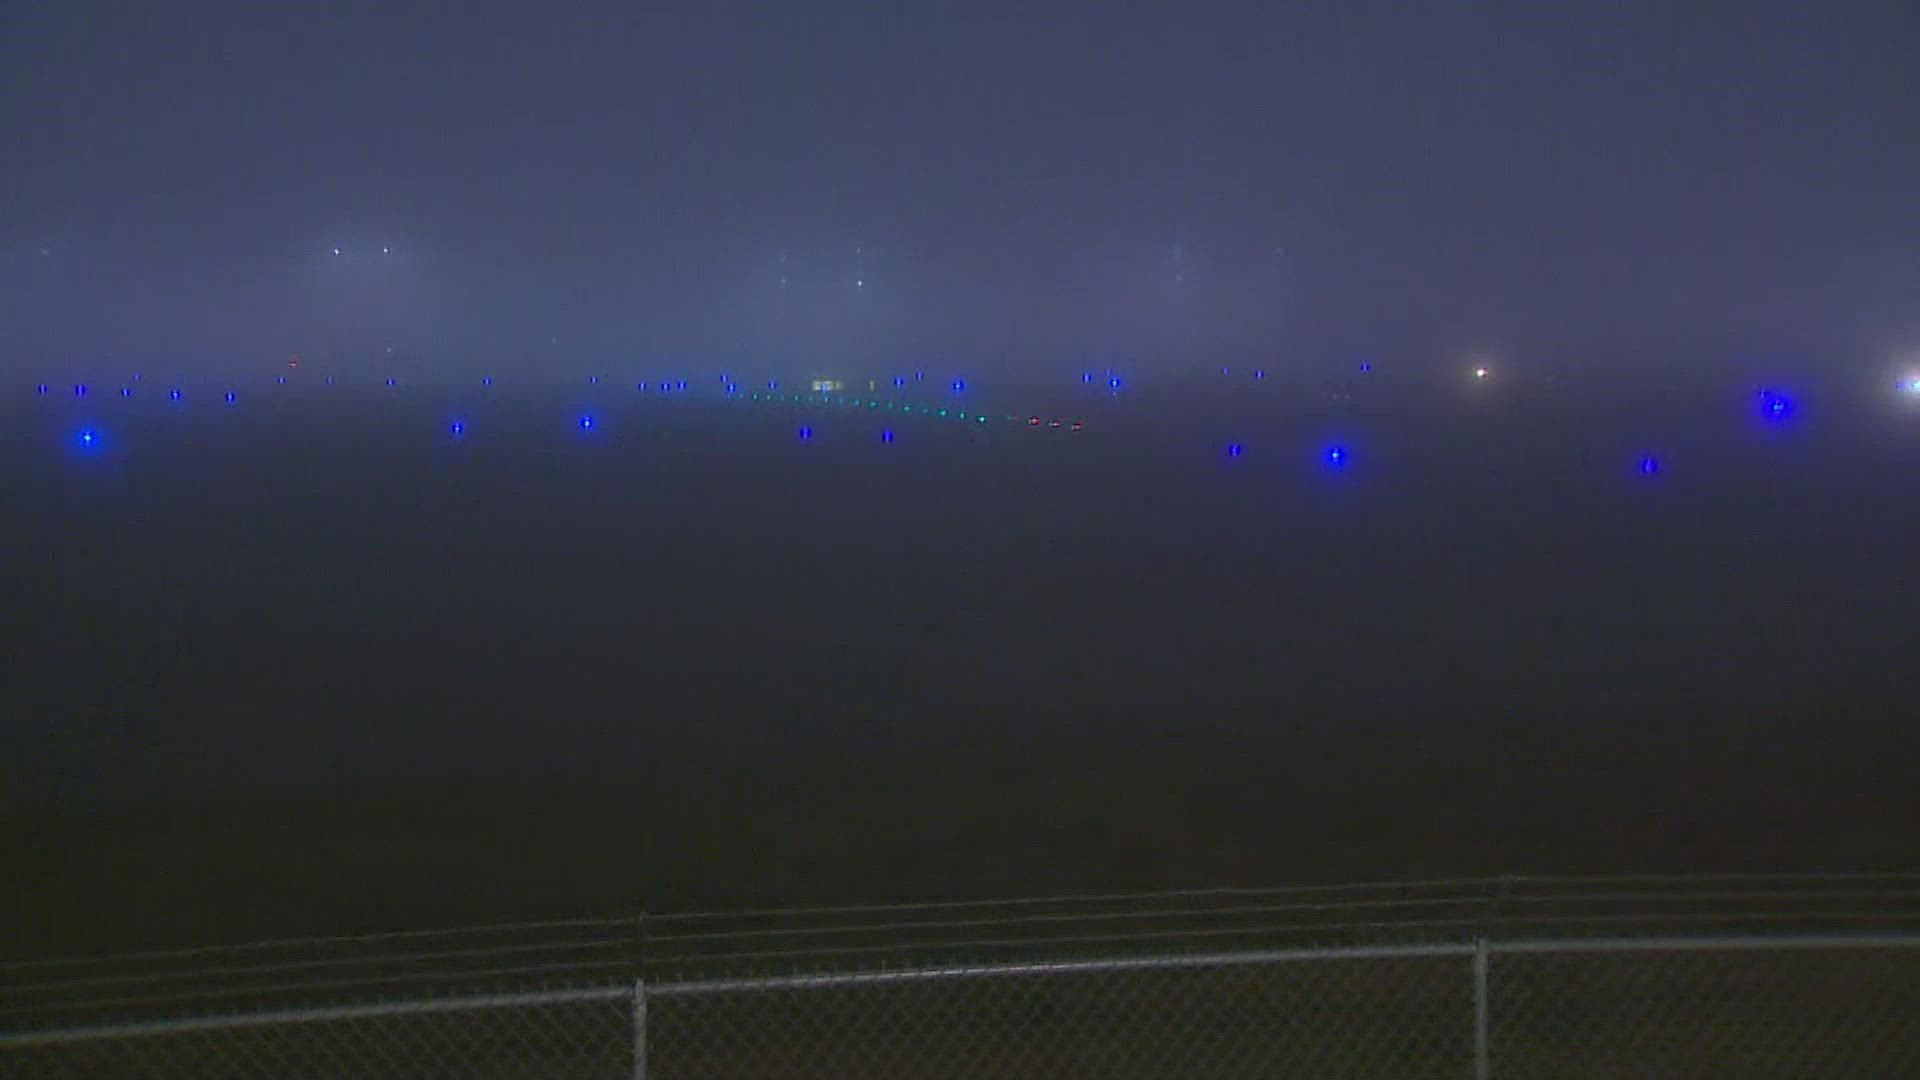 All flights at Everett's Paine Field were canceled on Monday and over 60% of Tuesday's flights were interrupted because of dense fog in the area.